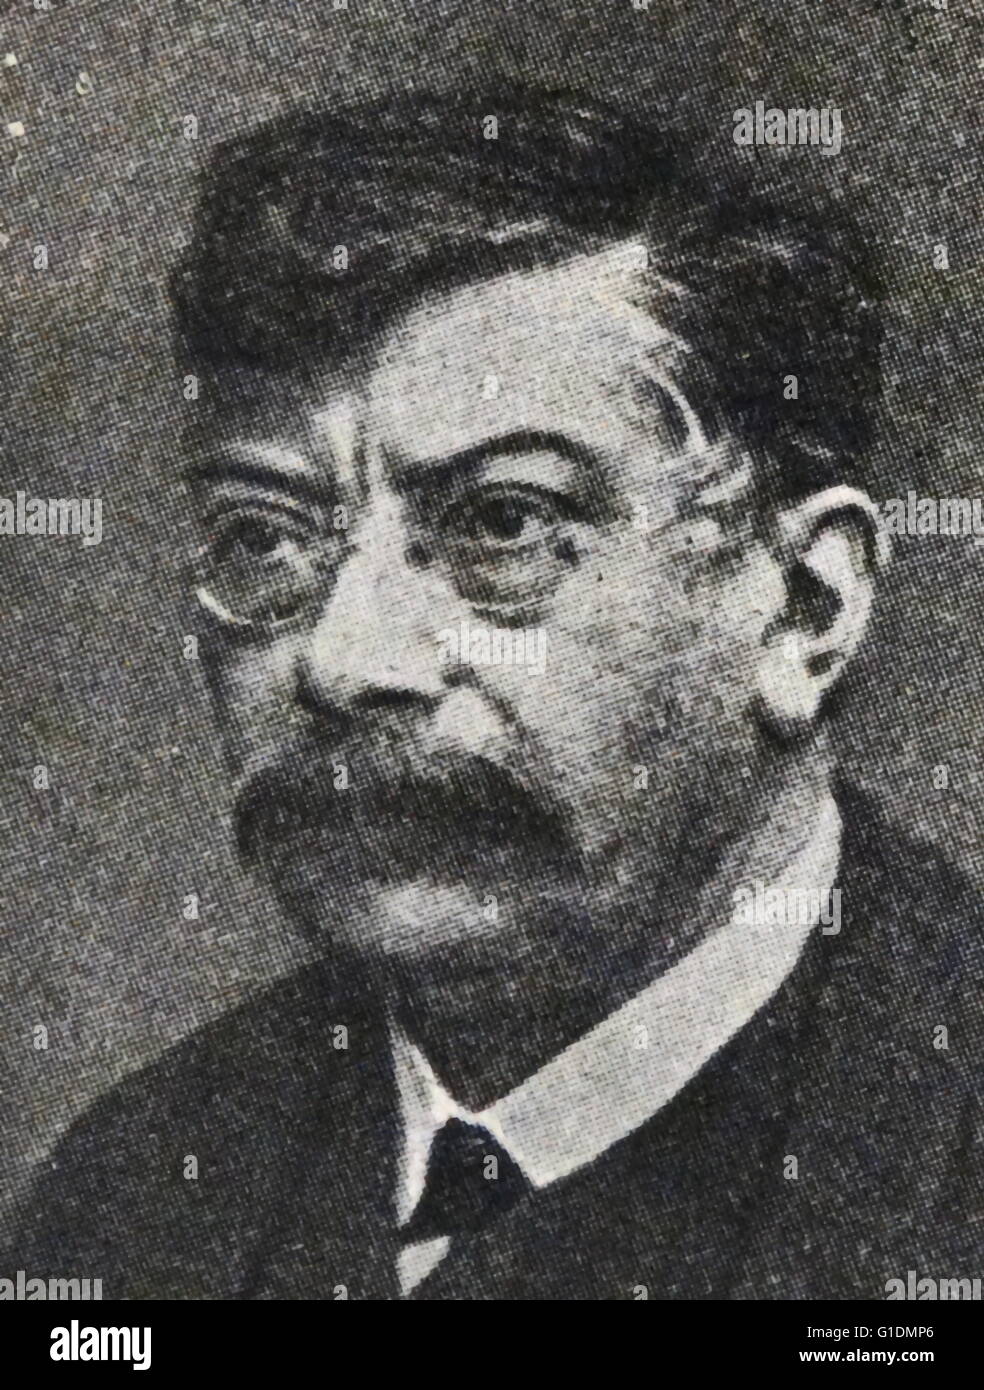 Pierre Laval (1883 – 1945), French politician. Prime Minister of France from 27 January 1931 to 20 February 1932, and from 7 June 1935 to 24 January 1936. Stock Photo